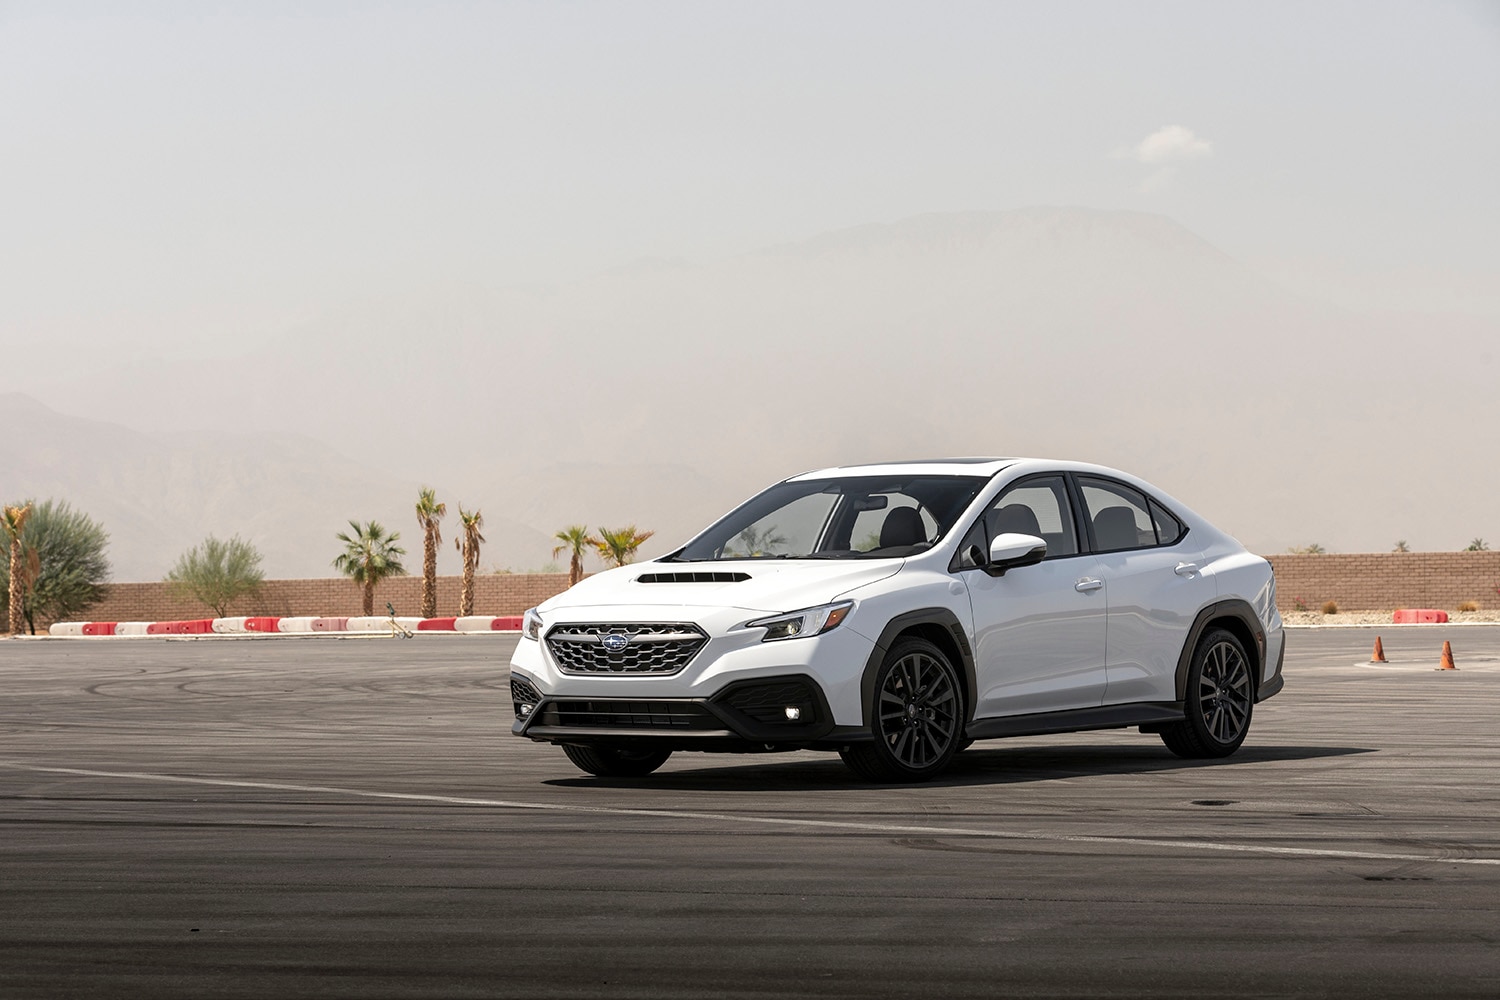 2023 Subaru WRX in white parked at a desert race track